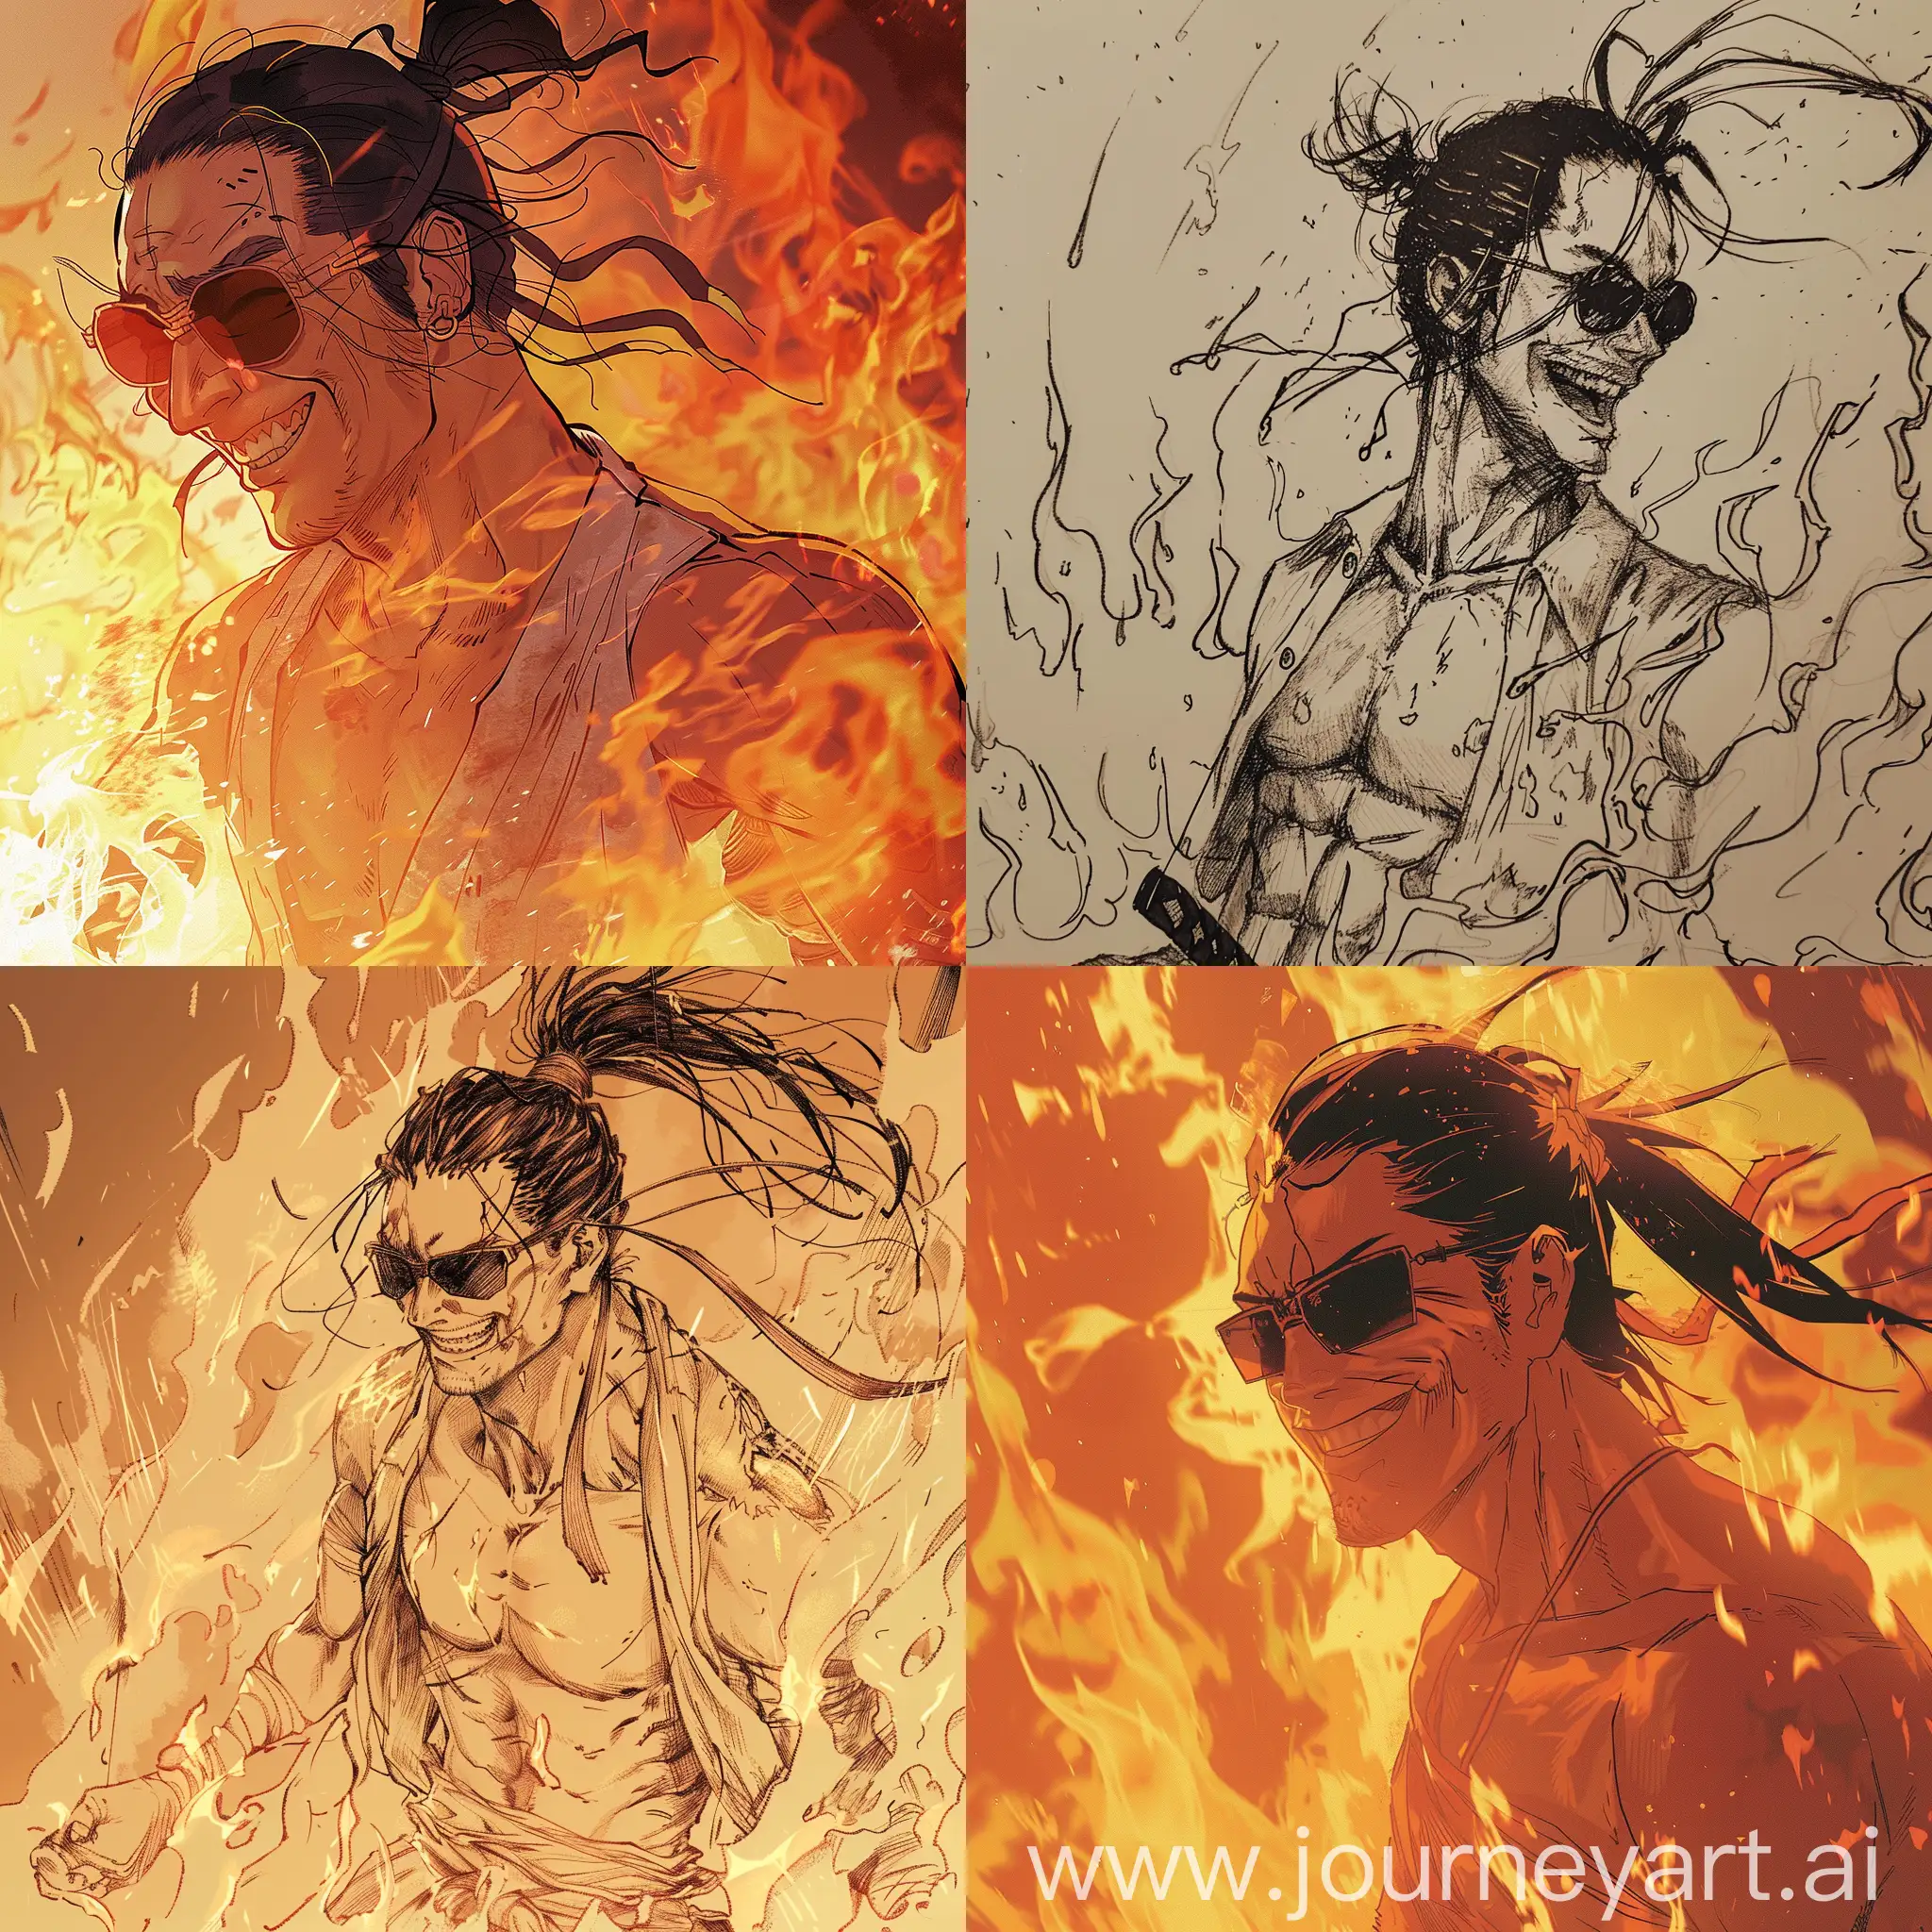 Smiling-Samurai-Stands-Tall-Amidst-Flames